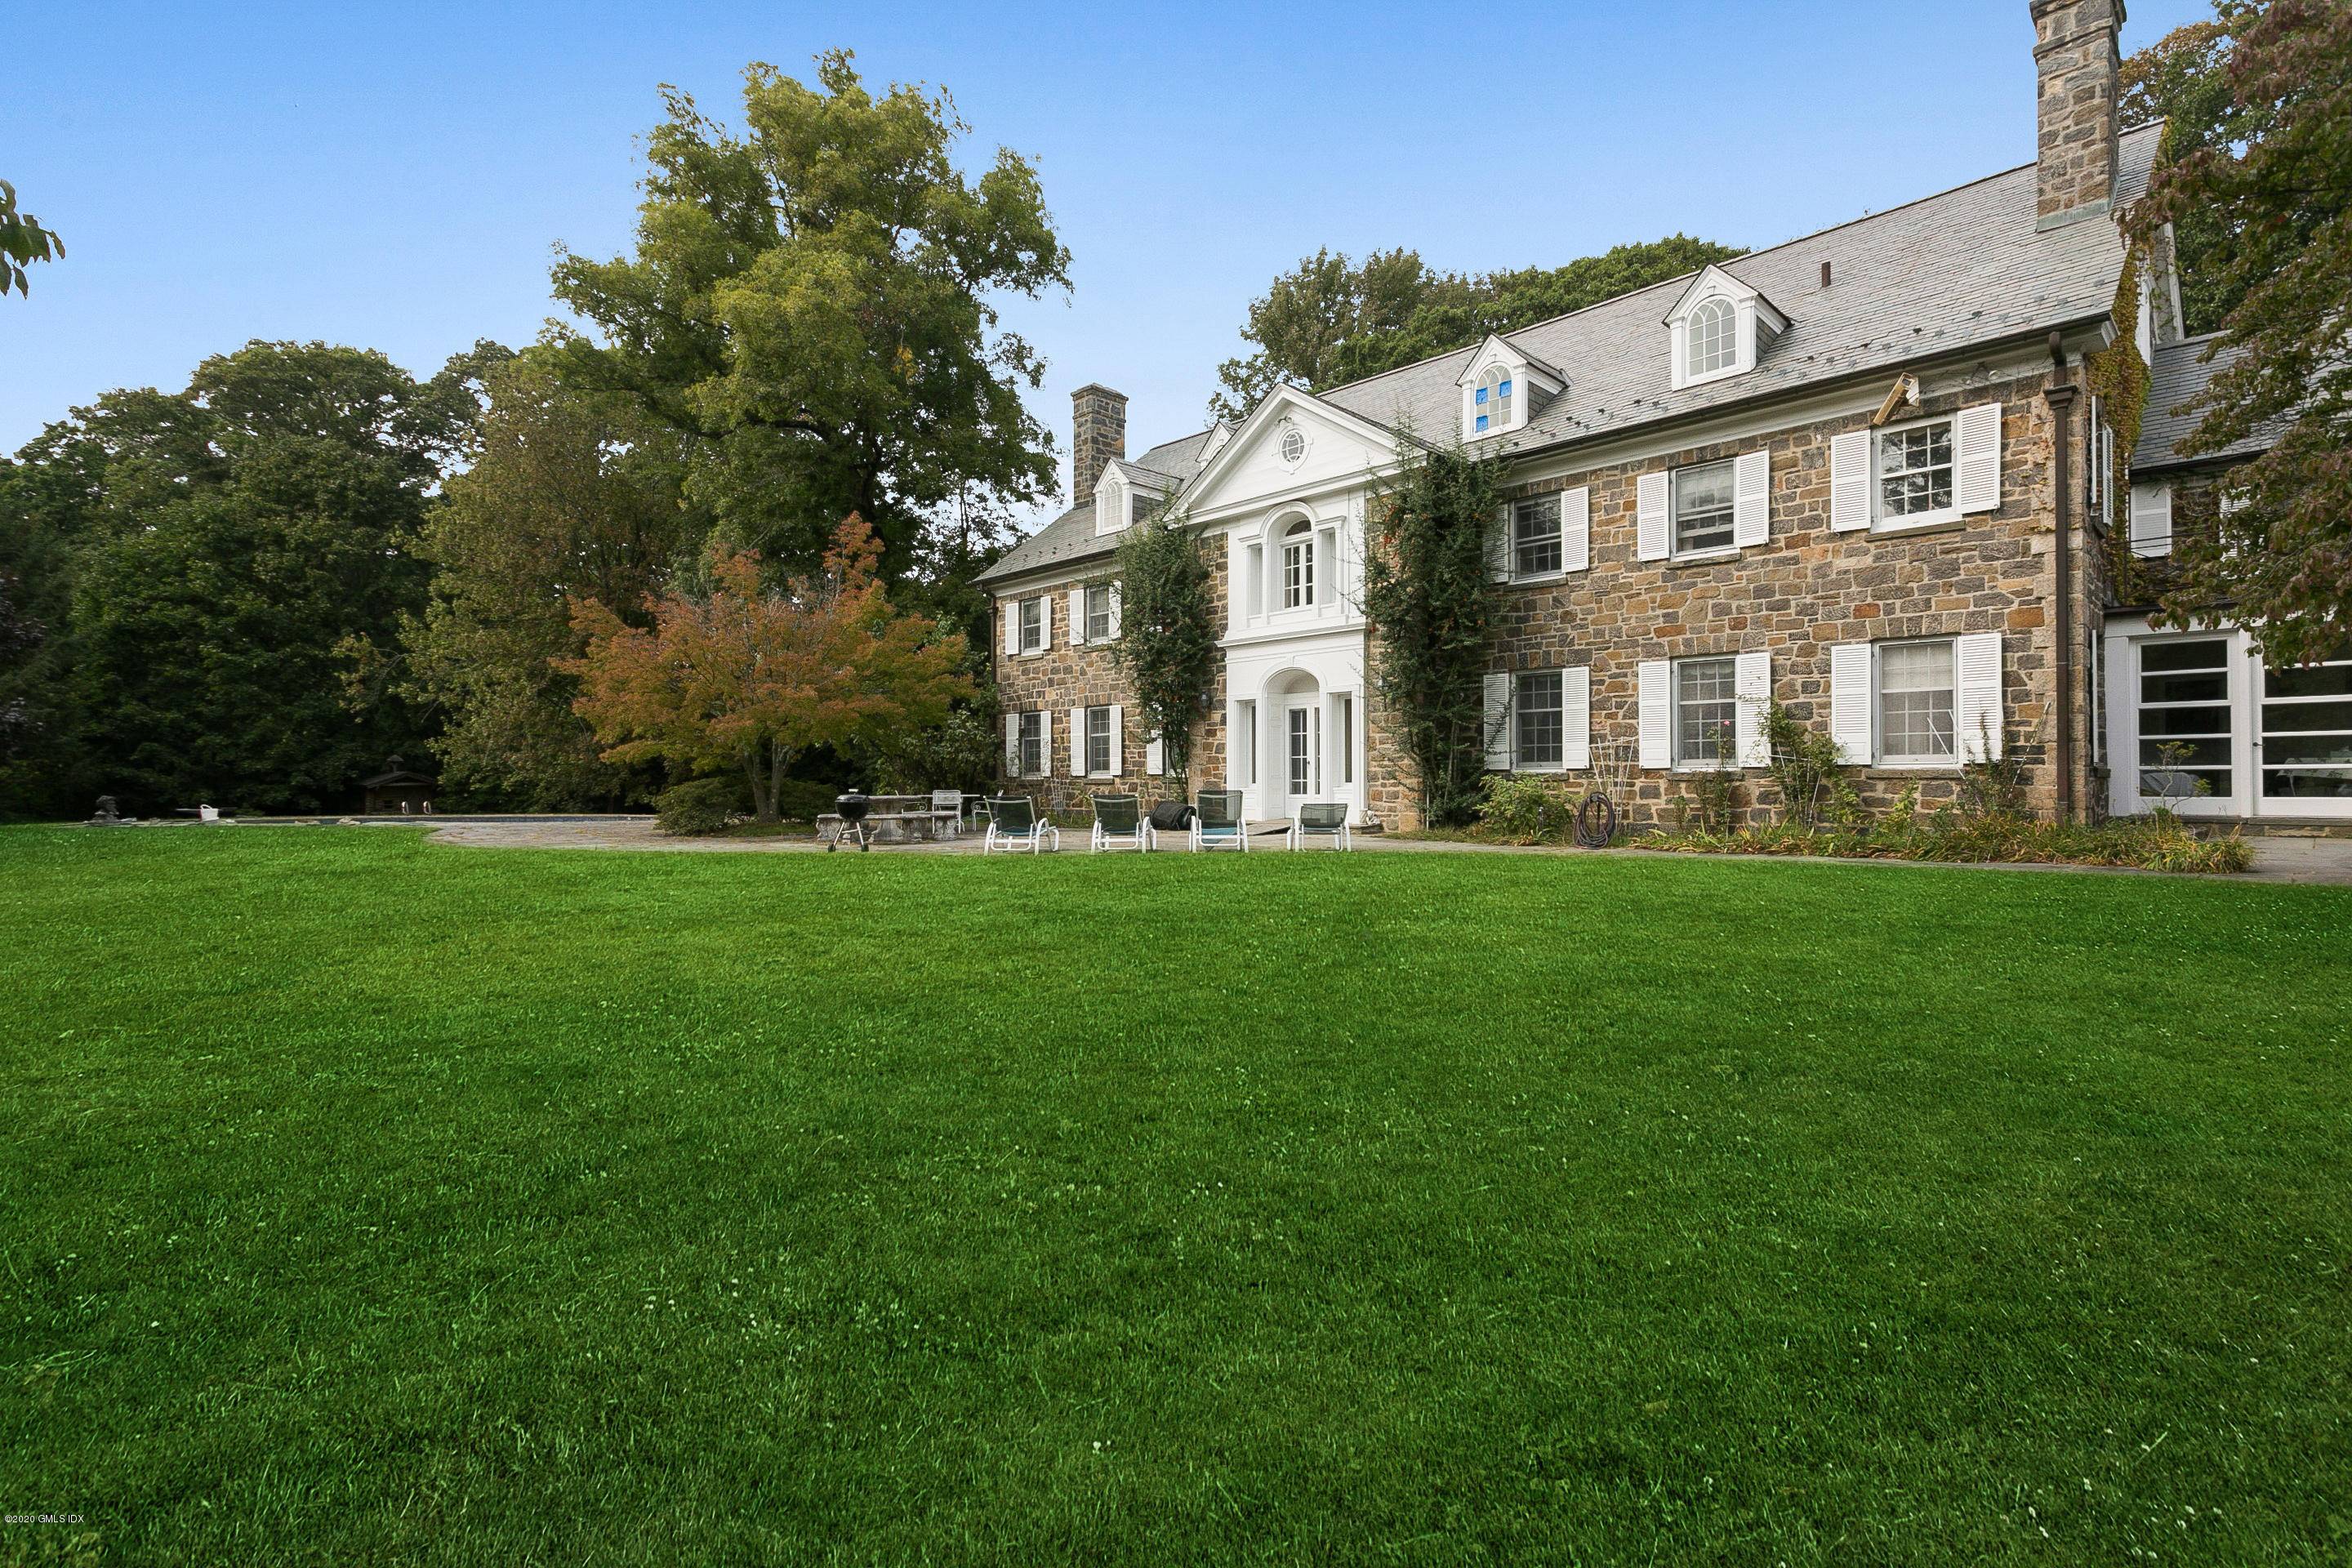 Located in the Deer Park association in prestigious Greenwich, CT on 2.